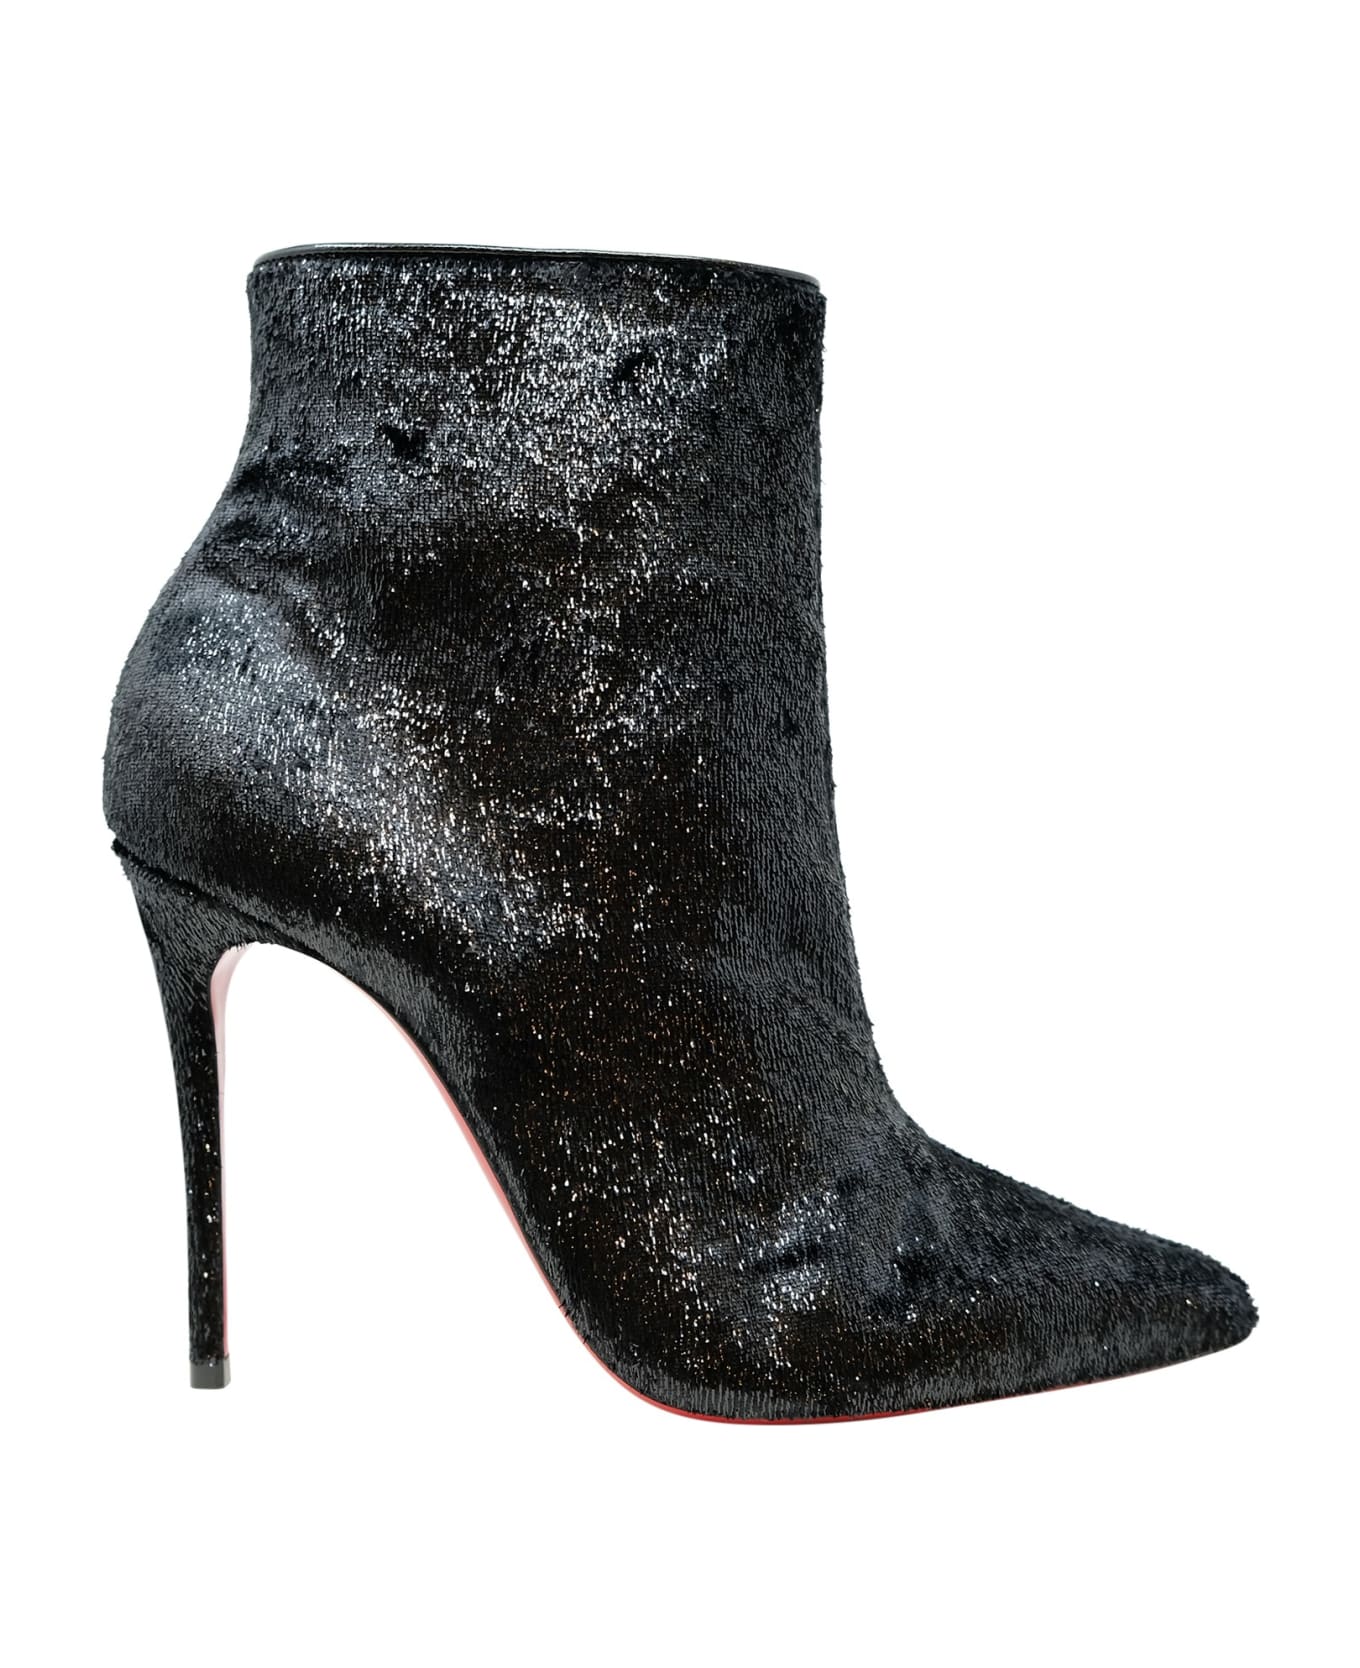 Christian Louboutin Black Velours So Kate Booty 100 Ankle Boots ブーツ